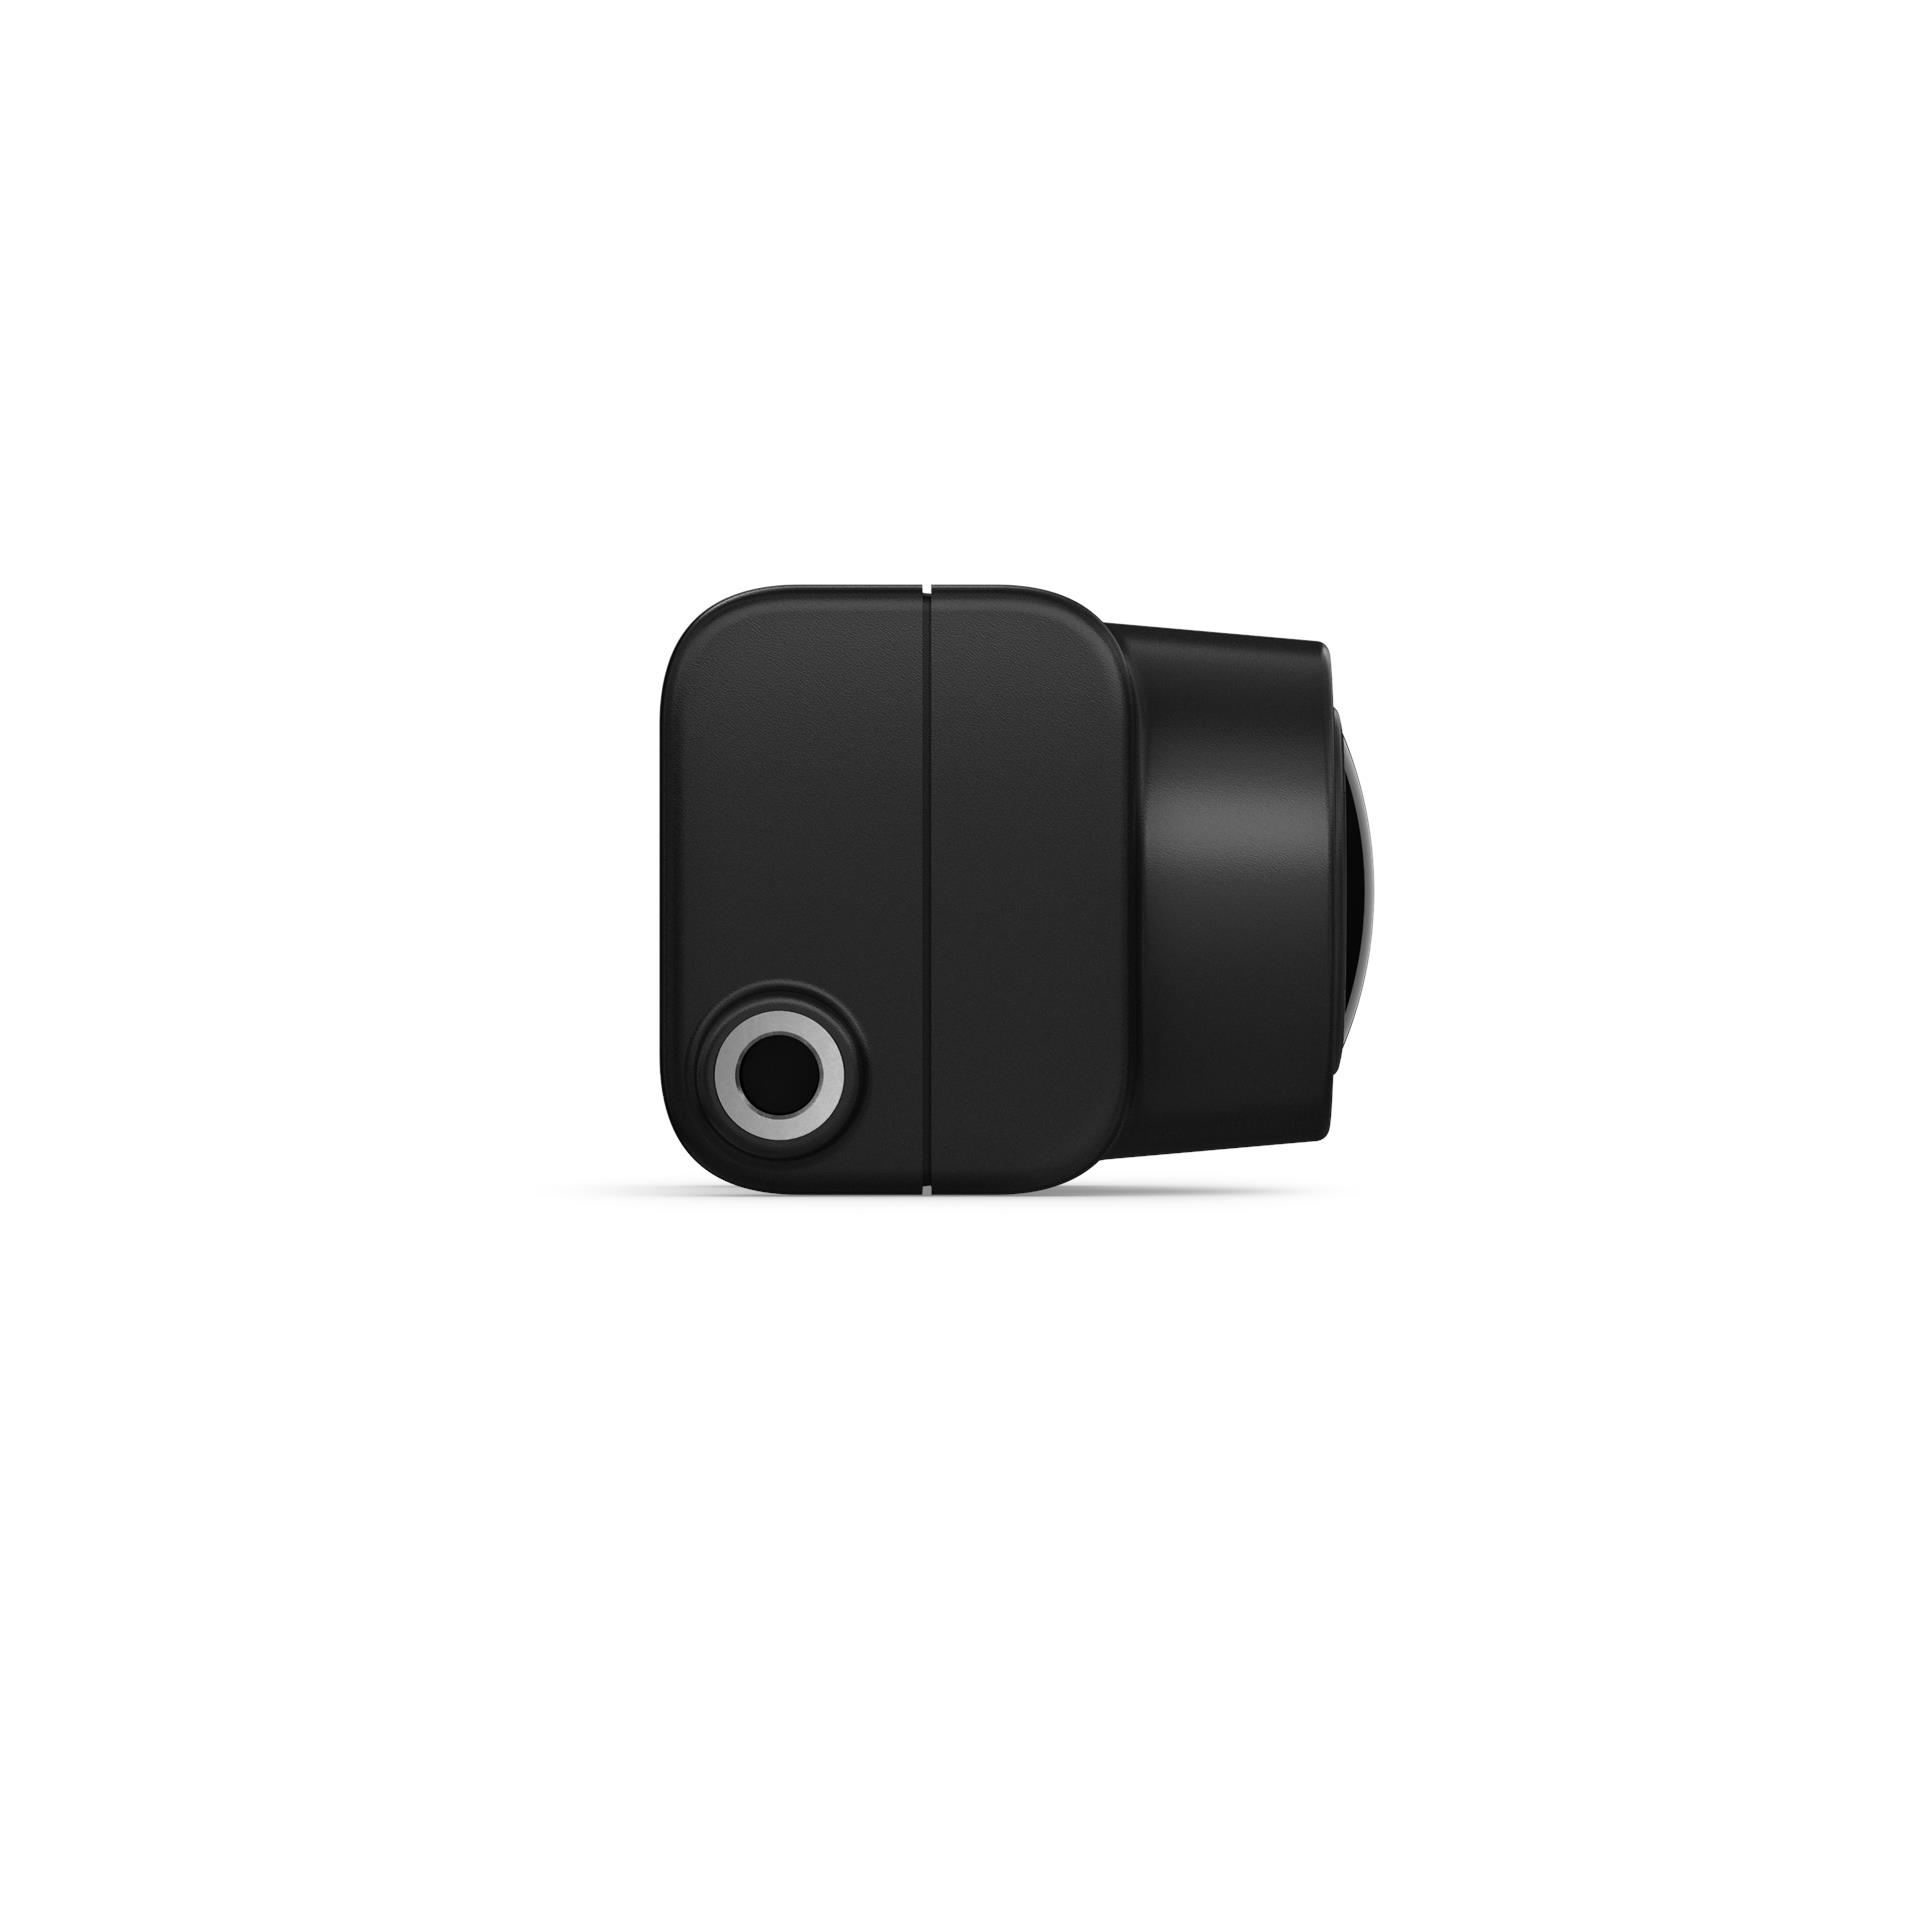 Garmin BC 50 Wireless Backup Camera with Night Vision, with License Plate Mount and Bracket Mount